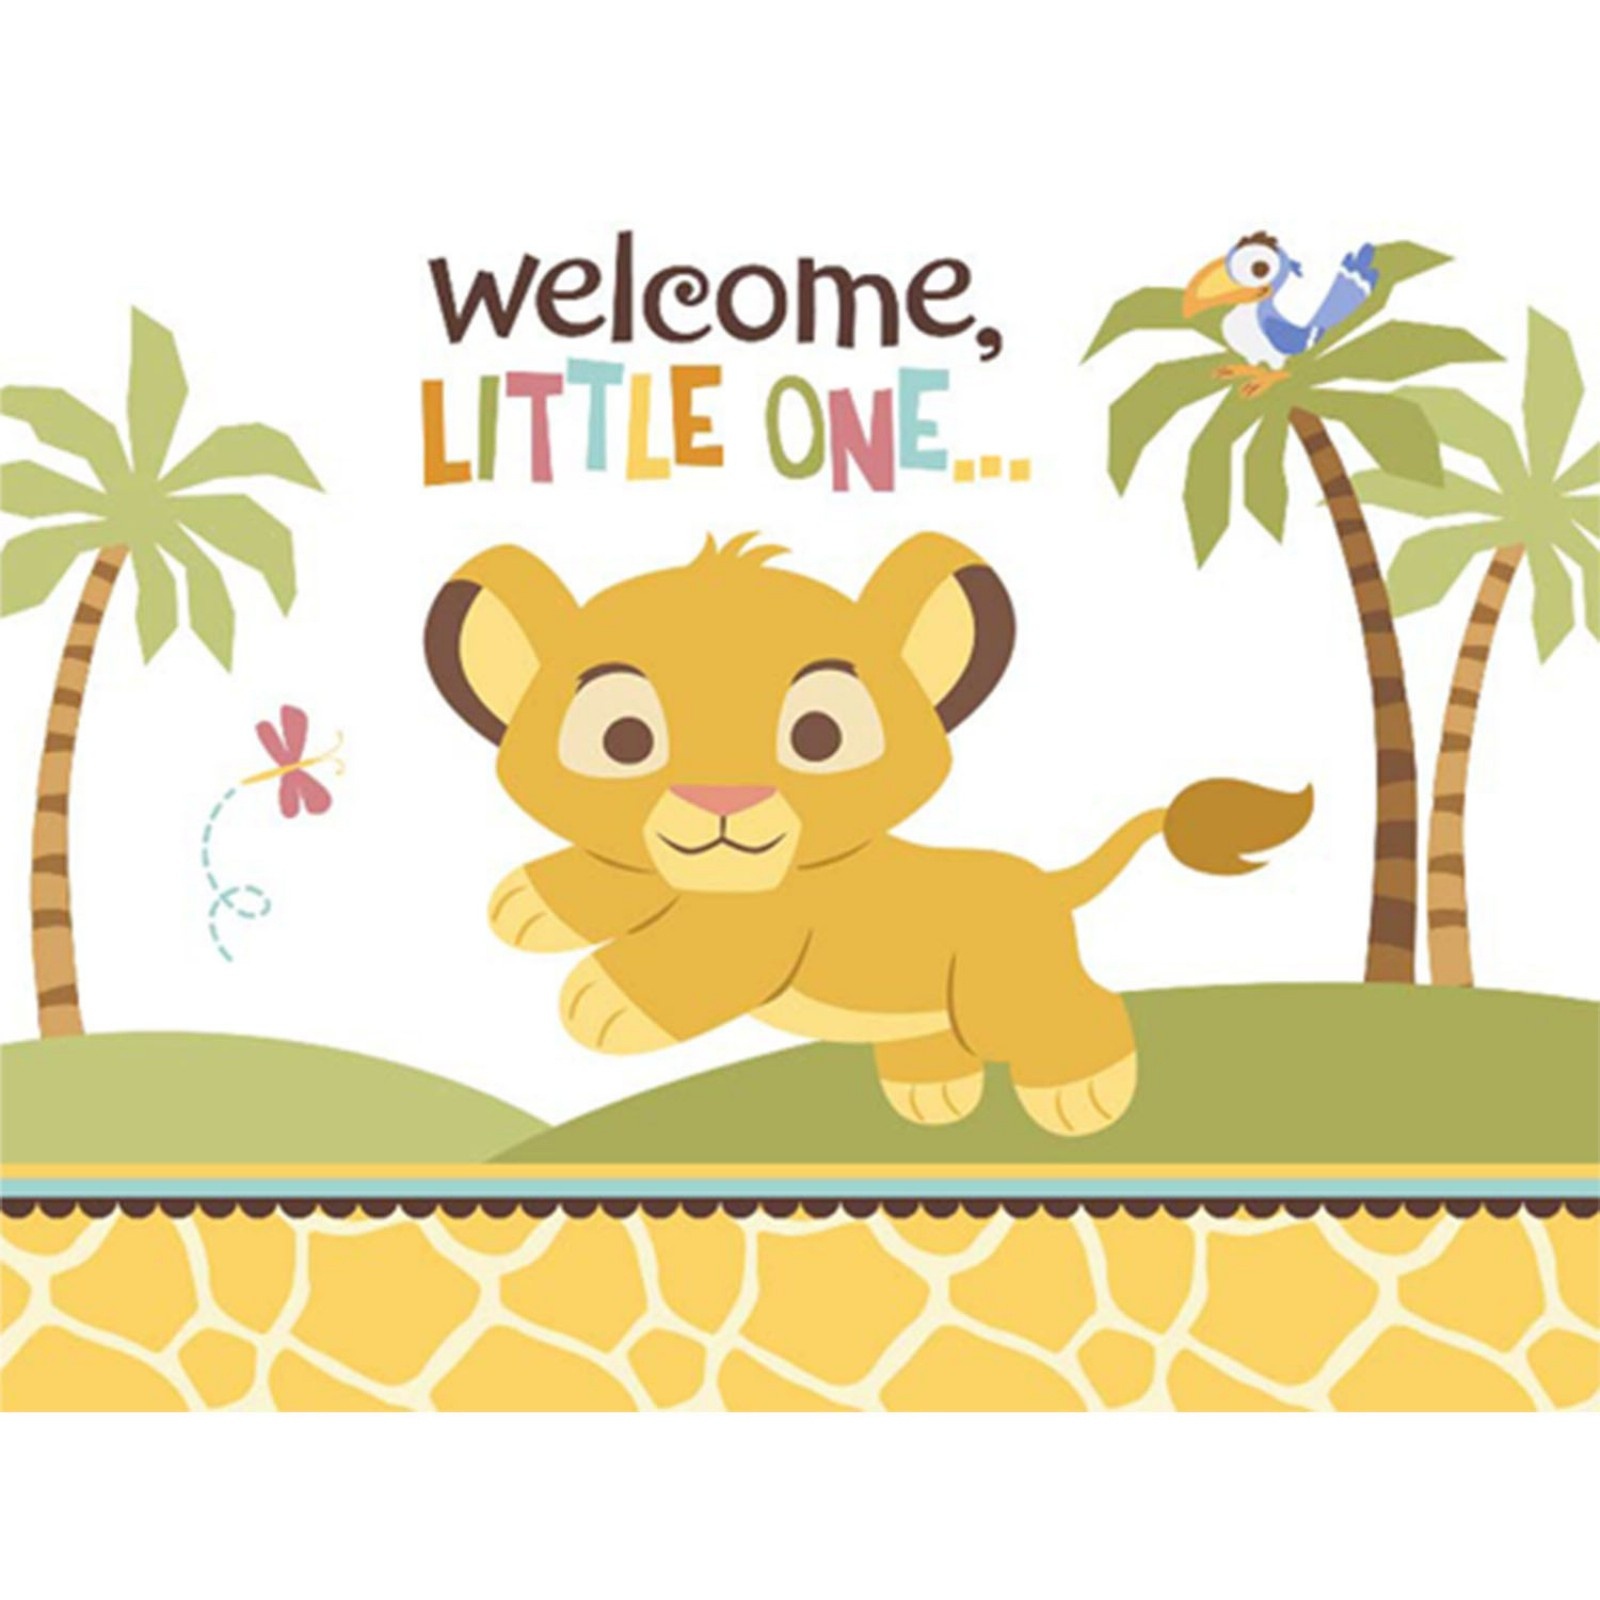 9 Free Lion King Baby Shower Invitations | Kittybabylove - Free Printable Lion King Baby Shower Invitations